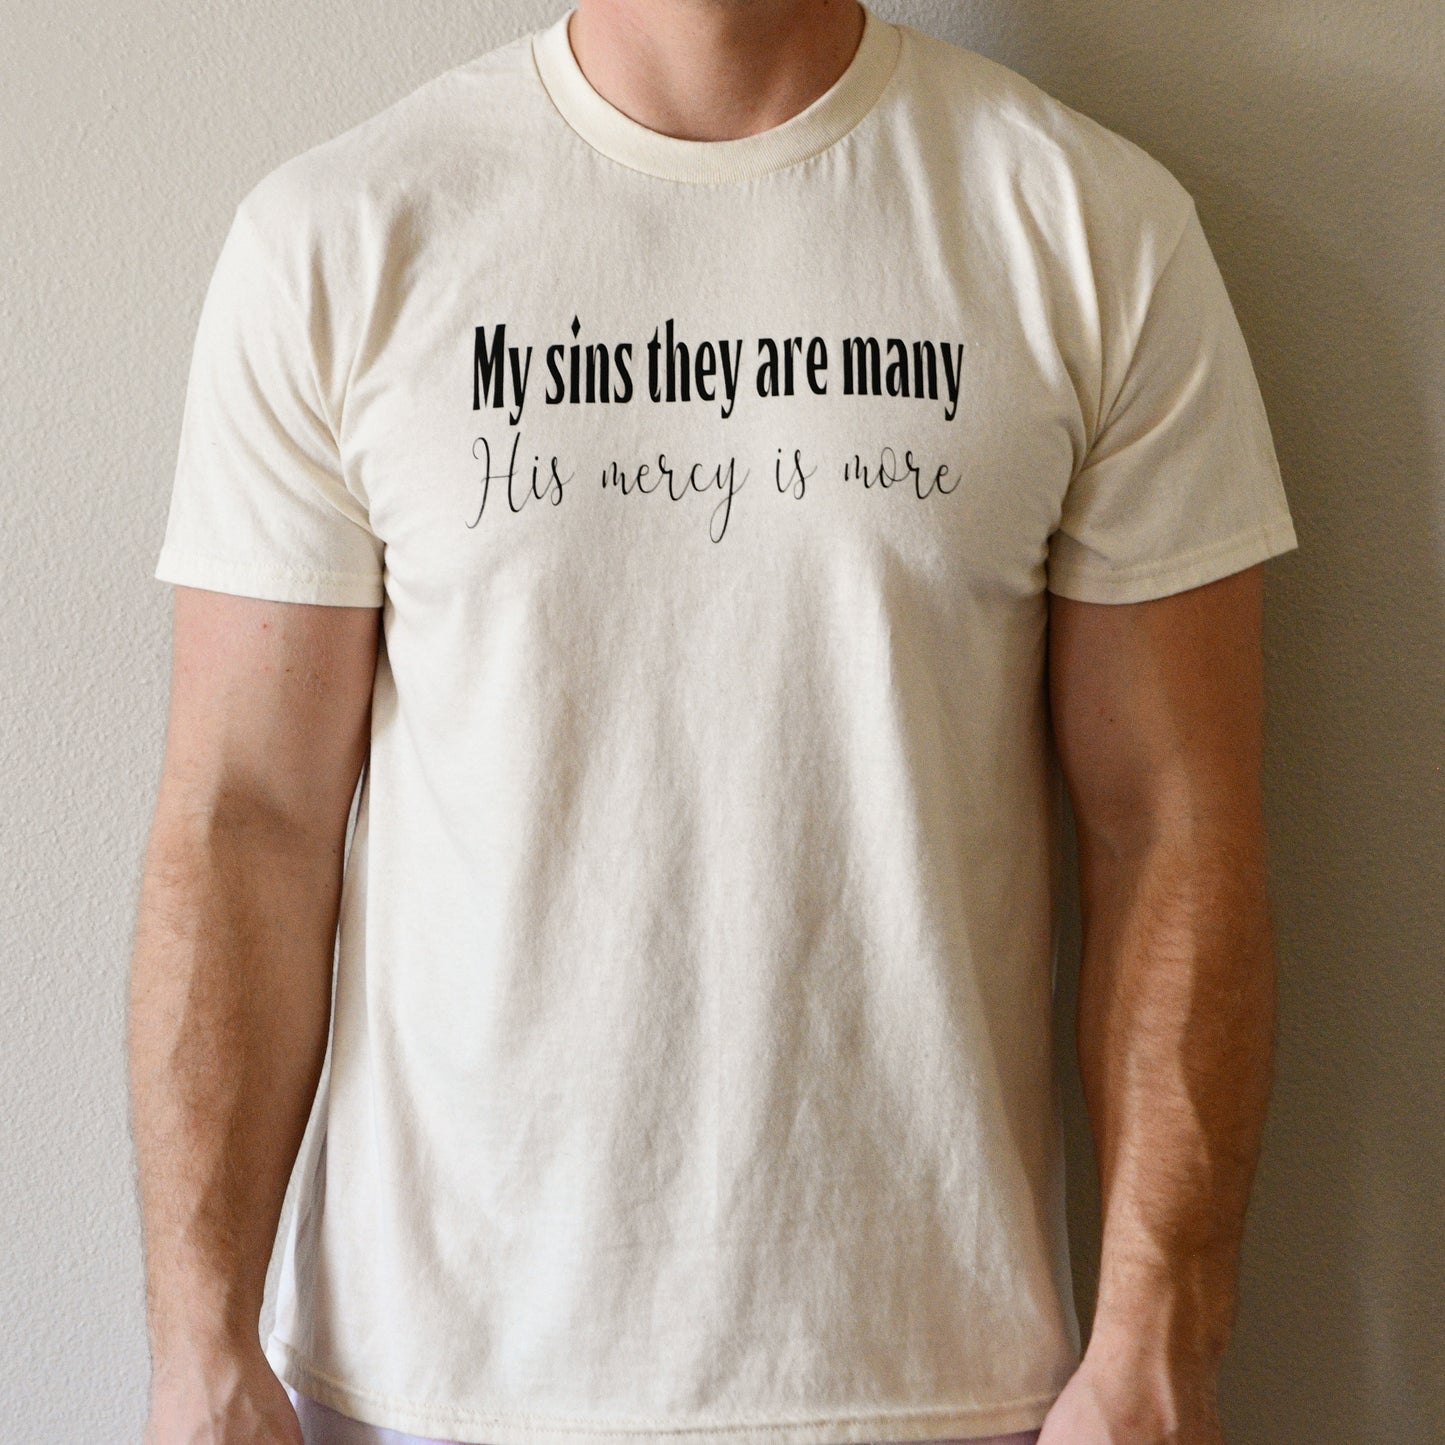 My Sins, His Mercy - 5 Sizes, 4 Colors Available